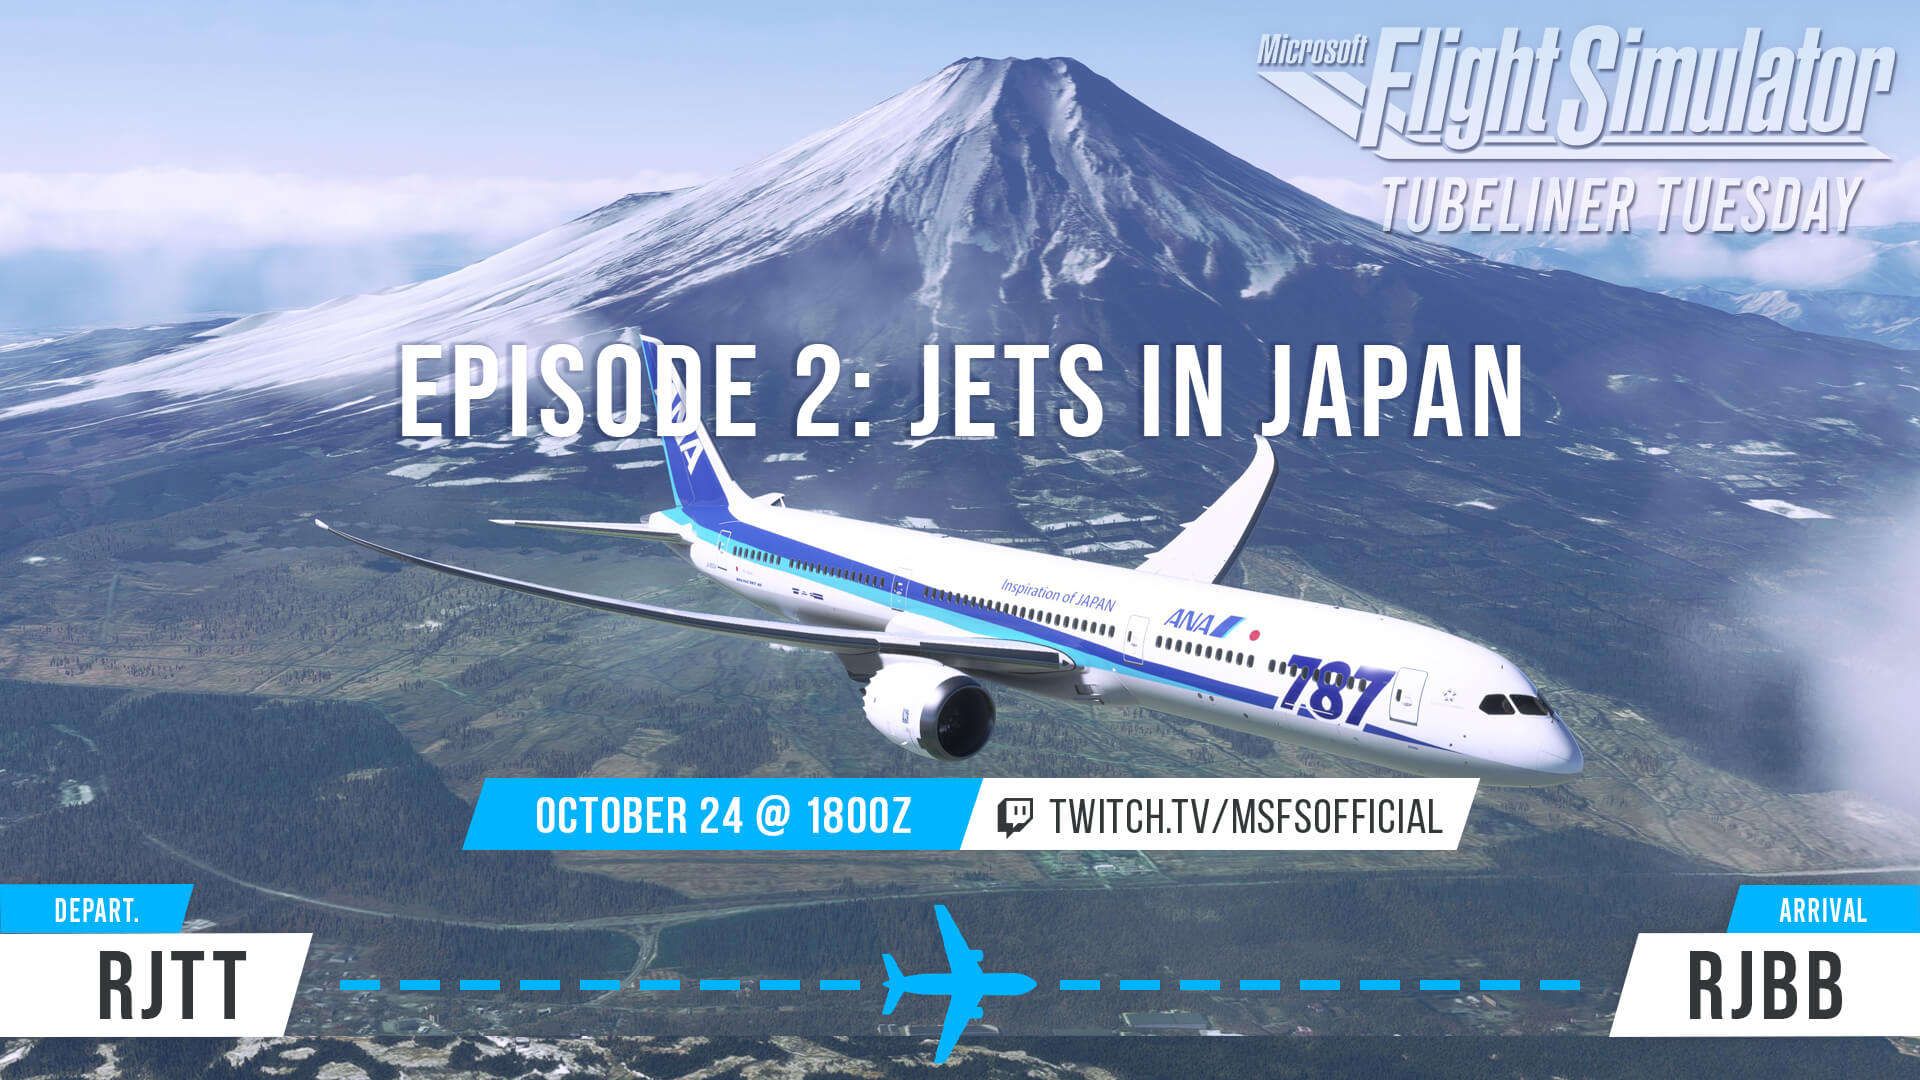 Tubeliner Tuesday Episode 2: Jets in Japan from RJTT to RJBB. Live on October 24th at 18:00z on www.twitch.tv/MSFSOfficial